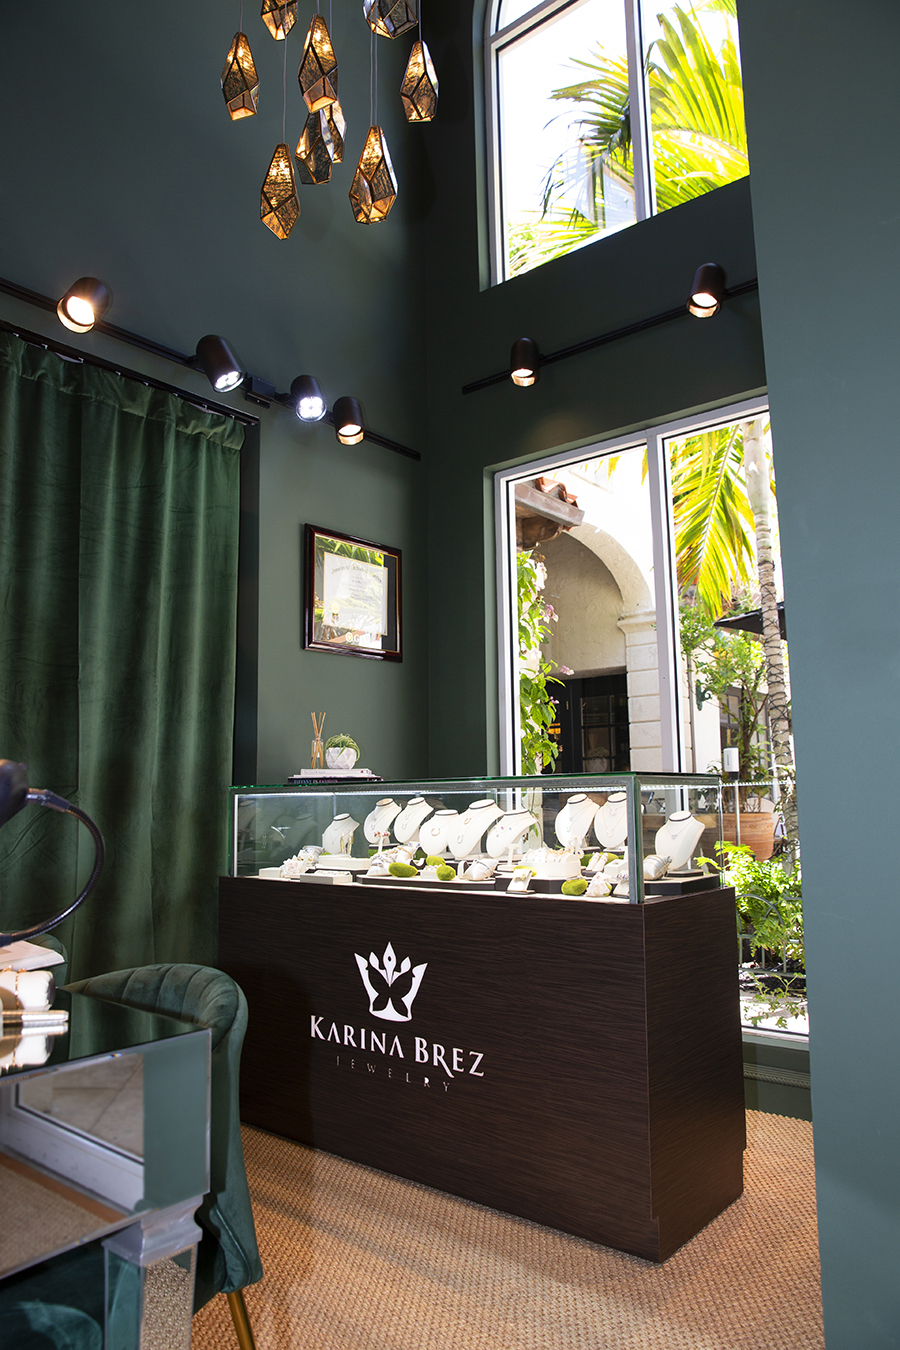 Interior of the Karina Brez Jewelry store in Palm Beach, FL. Image by Sergio Aguilar